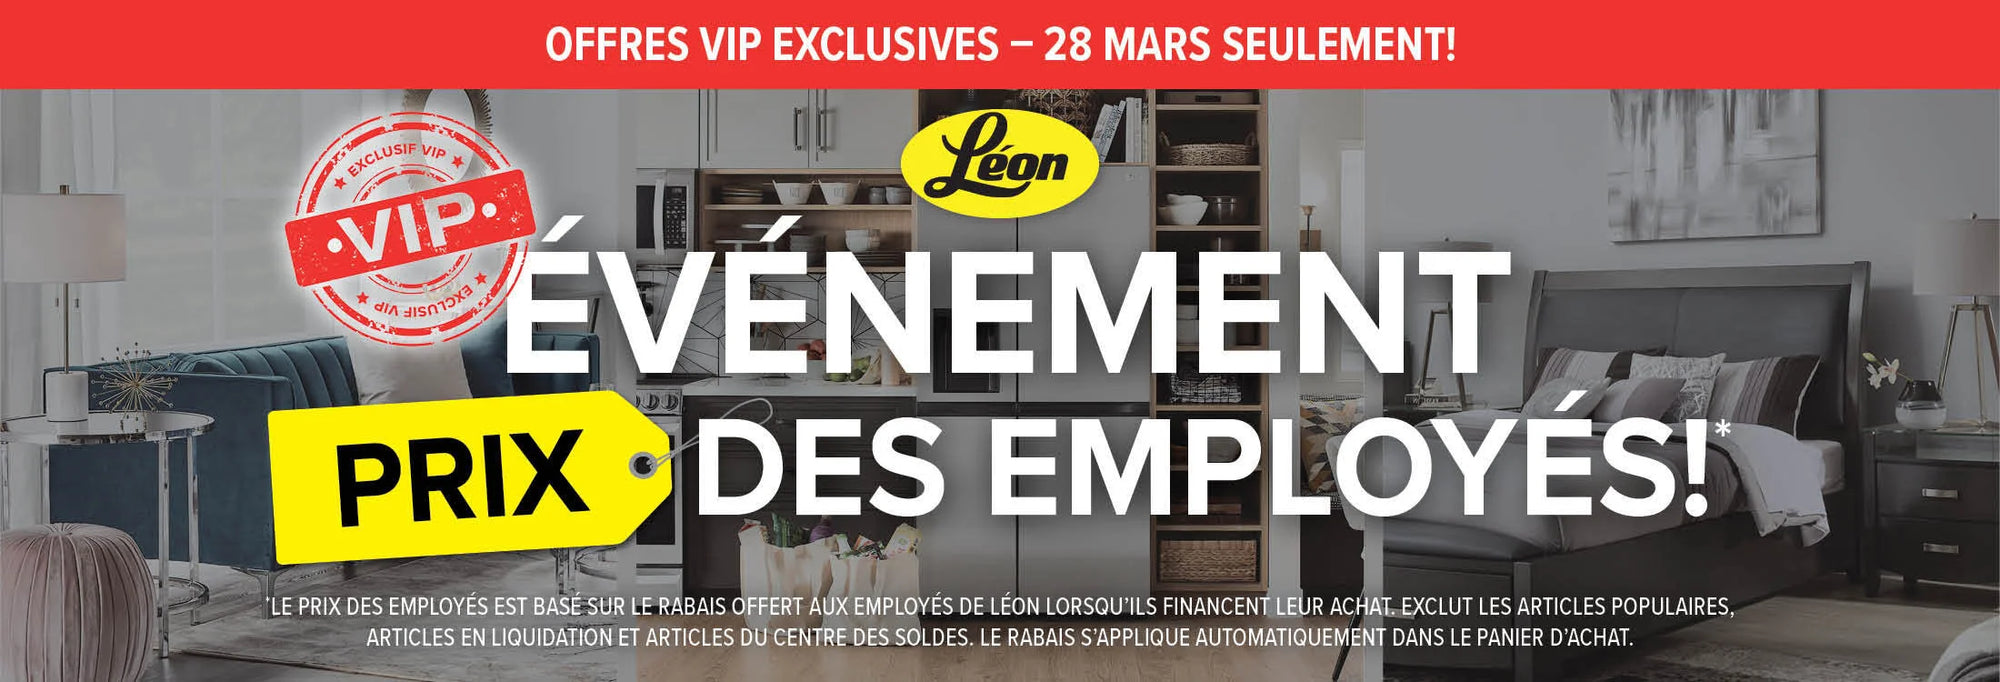 Exclusive VIP offers - March 28 Only! Leon's VIP Employee Pricing Event.